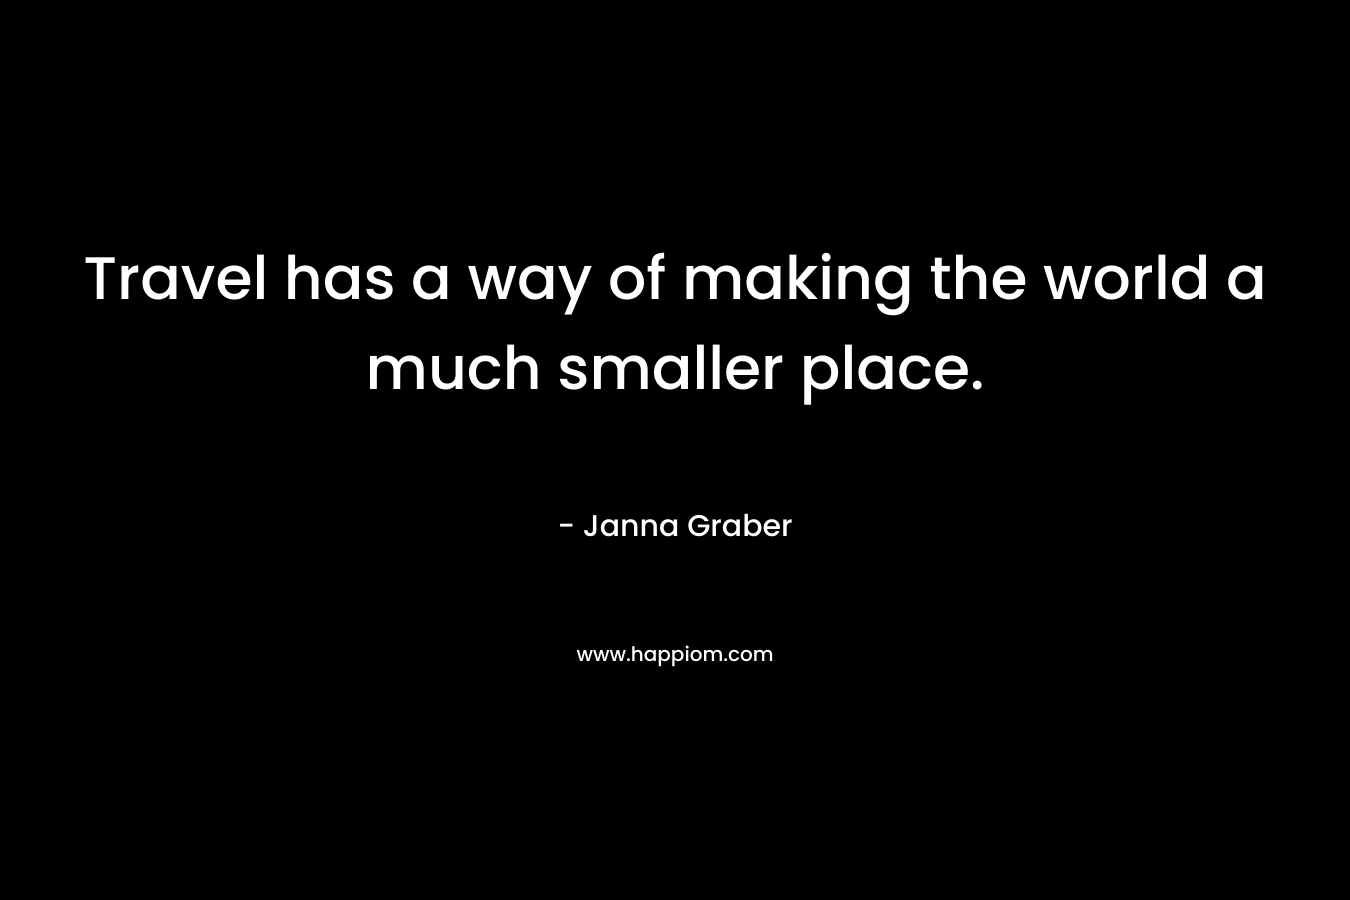 Travel has a way of making the world a much smaller place. – Janna Graber